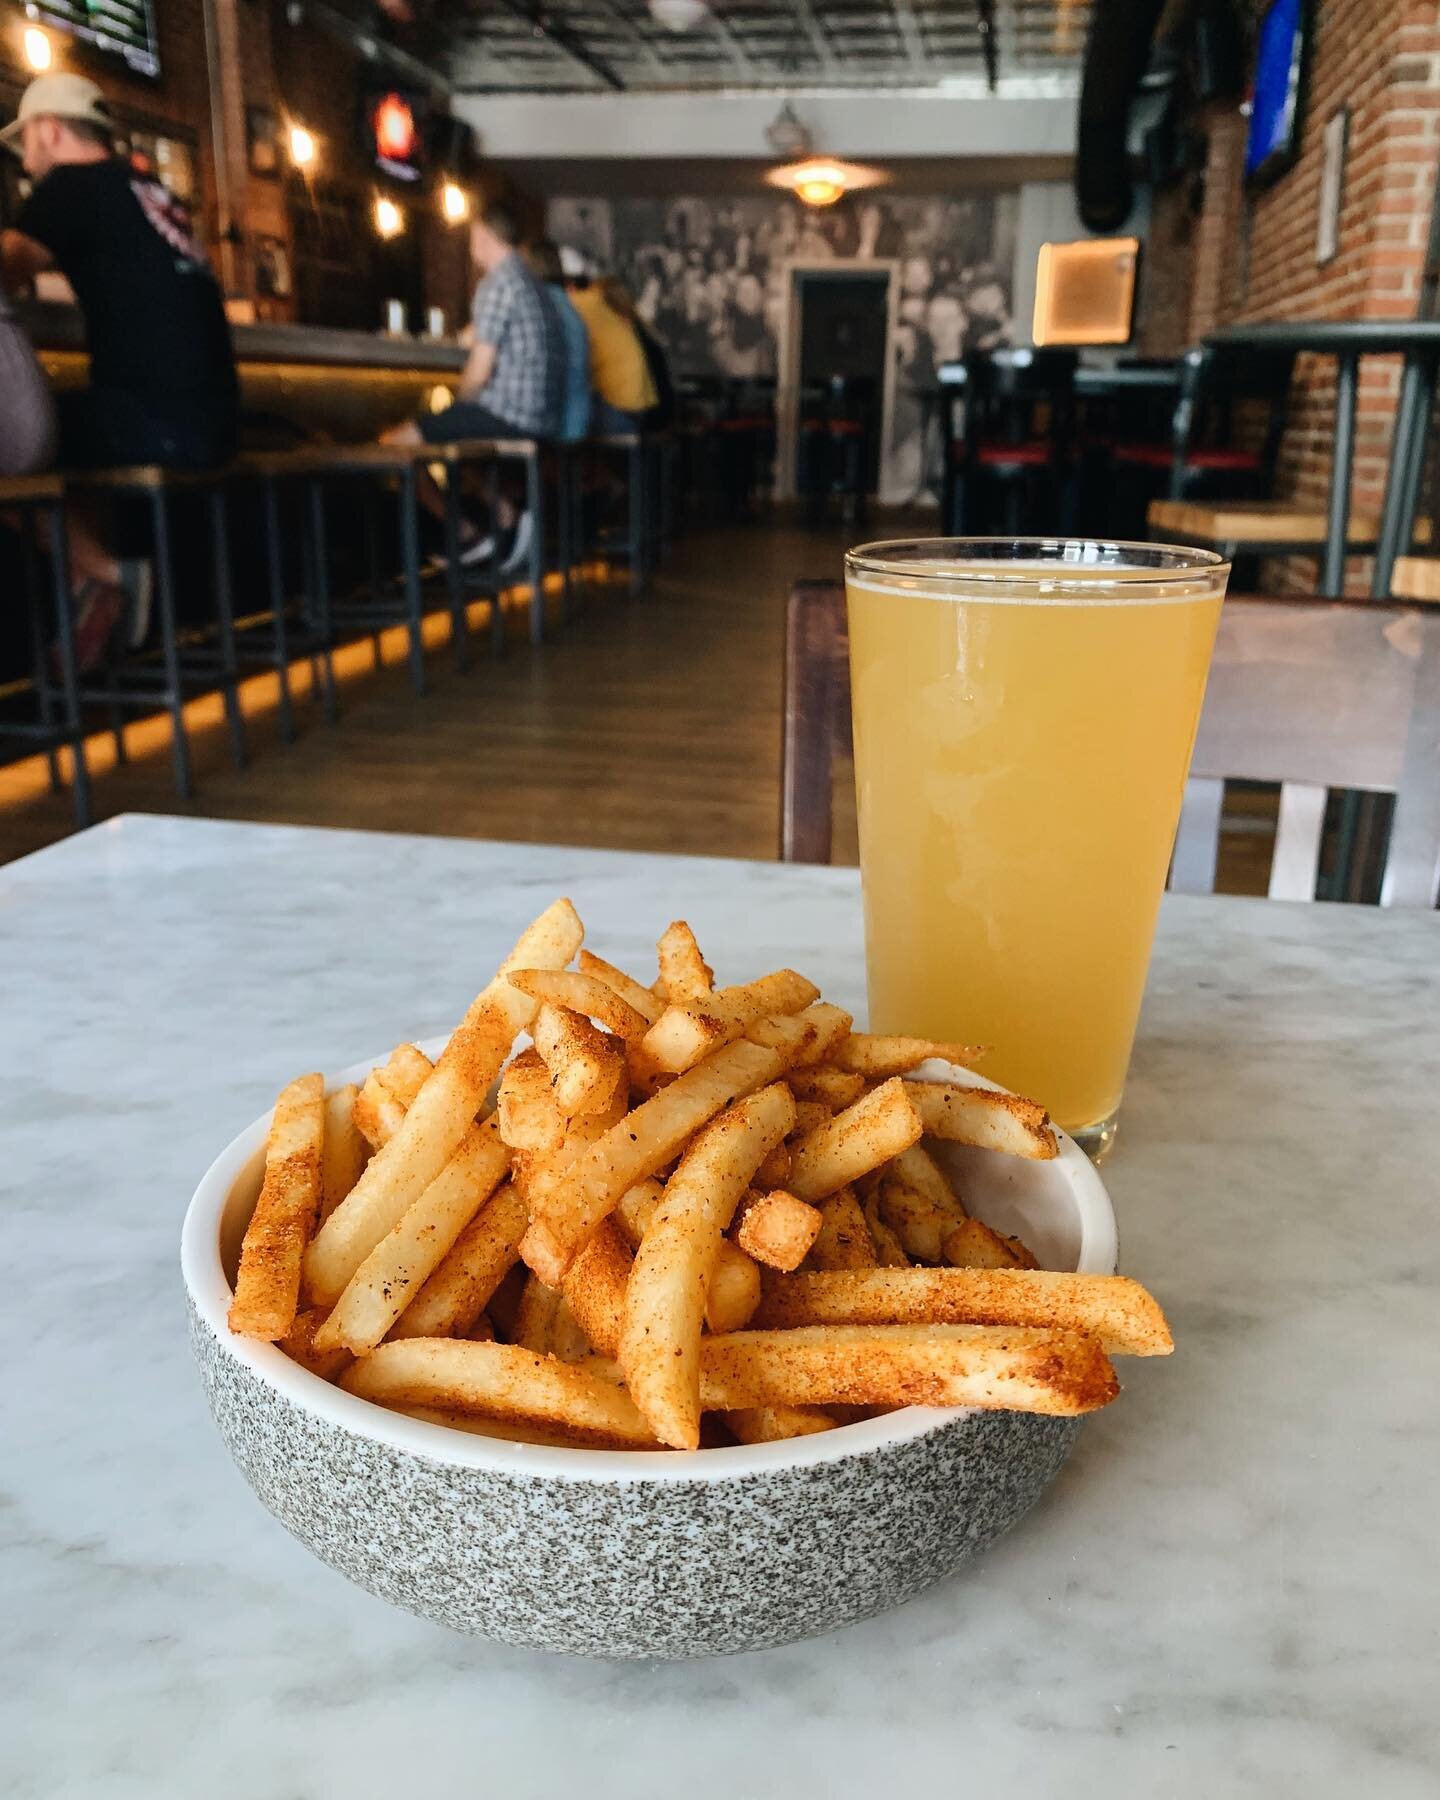 Pop in for some hot, crisp seasoned fries and a cold Dr Dank Daily Haze by @wickedweedbrewing ok this rainy Pittsburgh day! 

Doors open at 11am, right off 19th Street! Check out our 12 rotating drafts, classic cocktails, and Market Menu for a delici